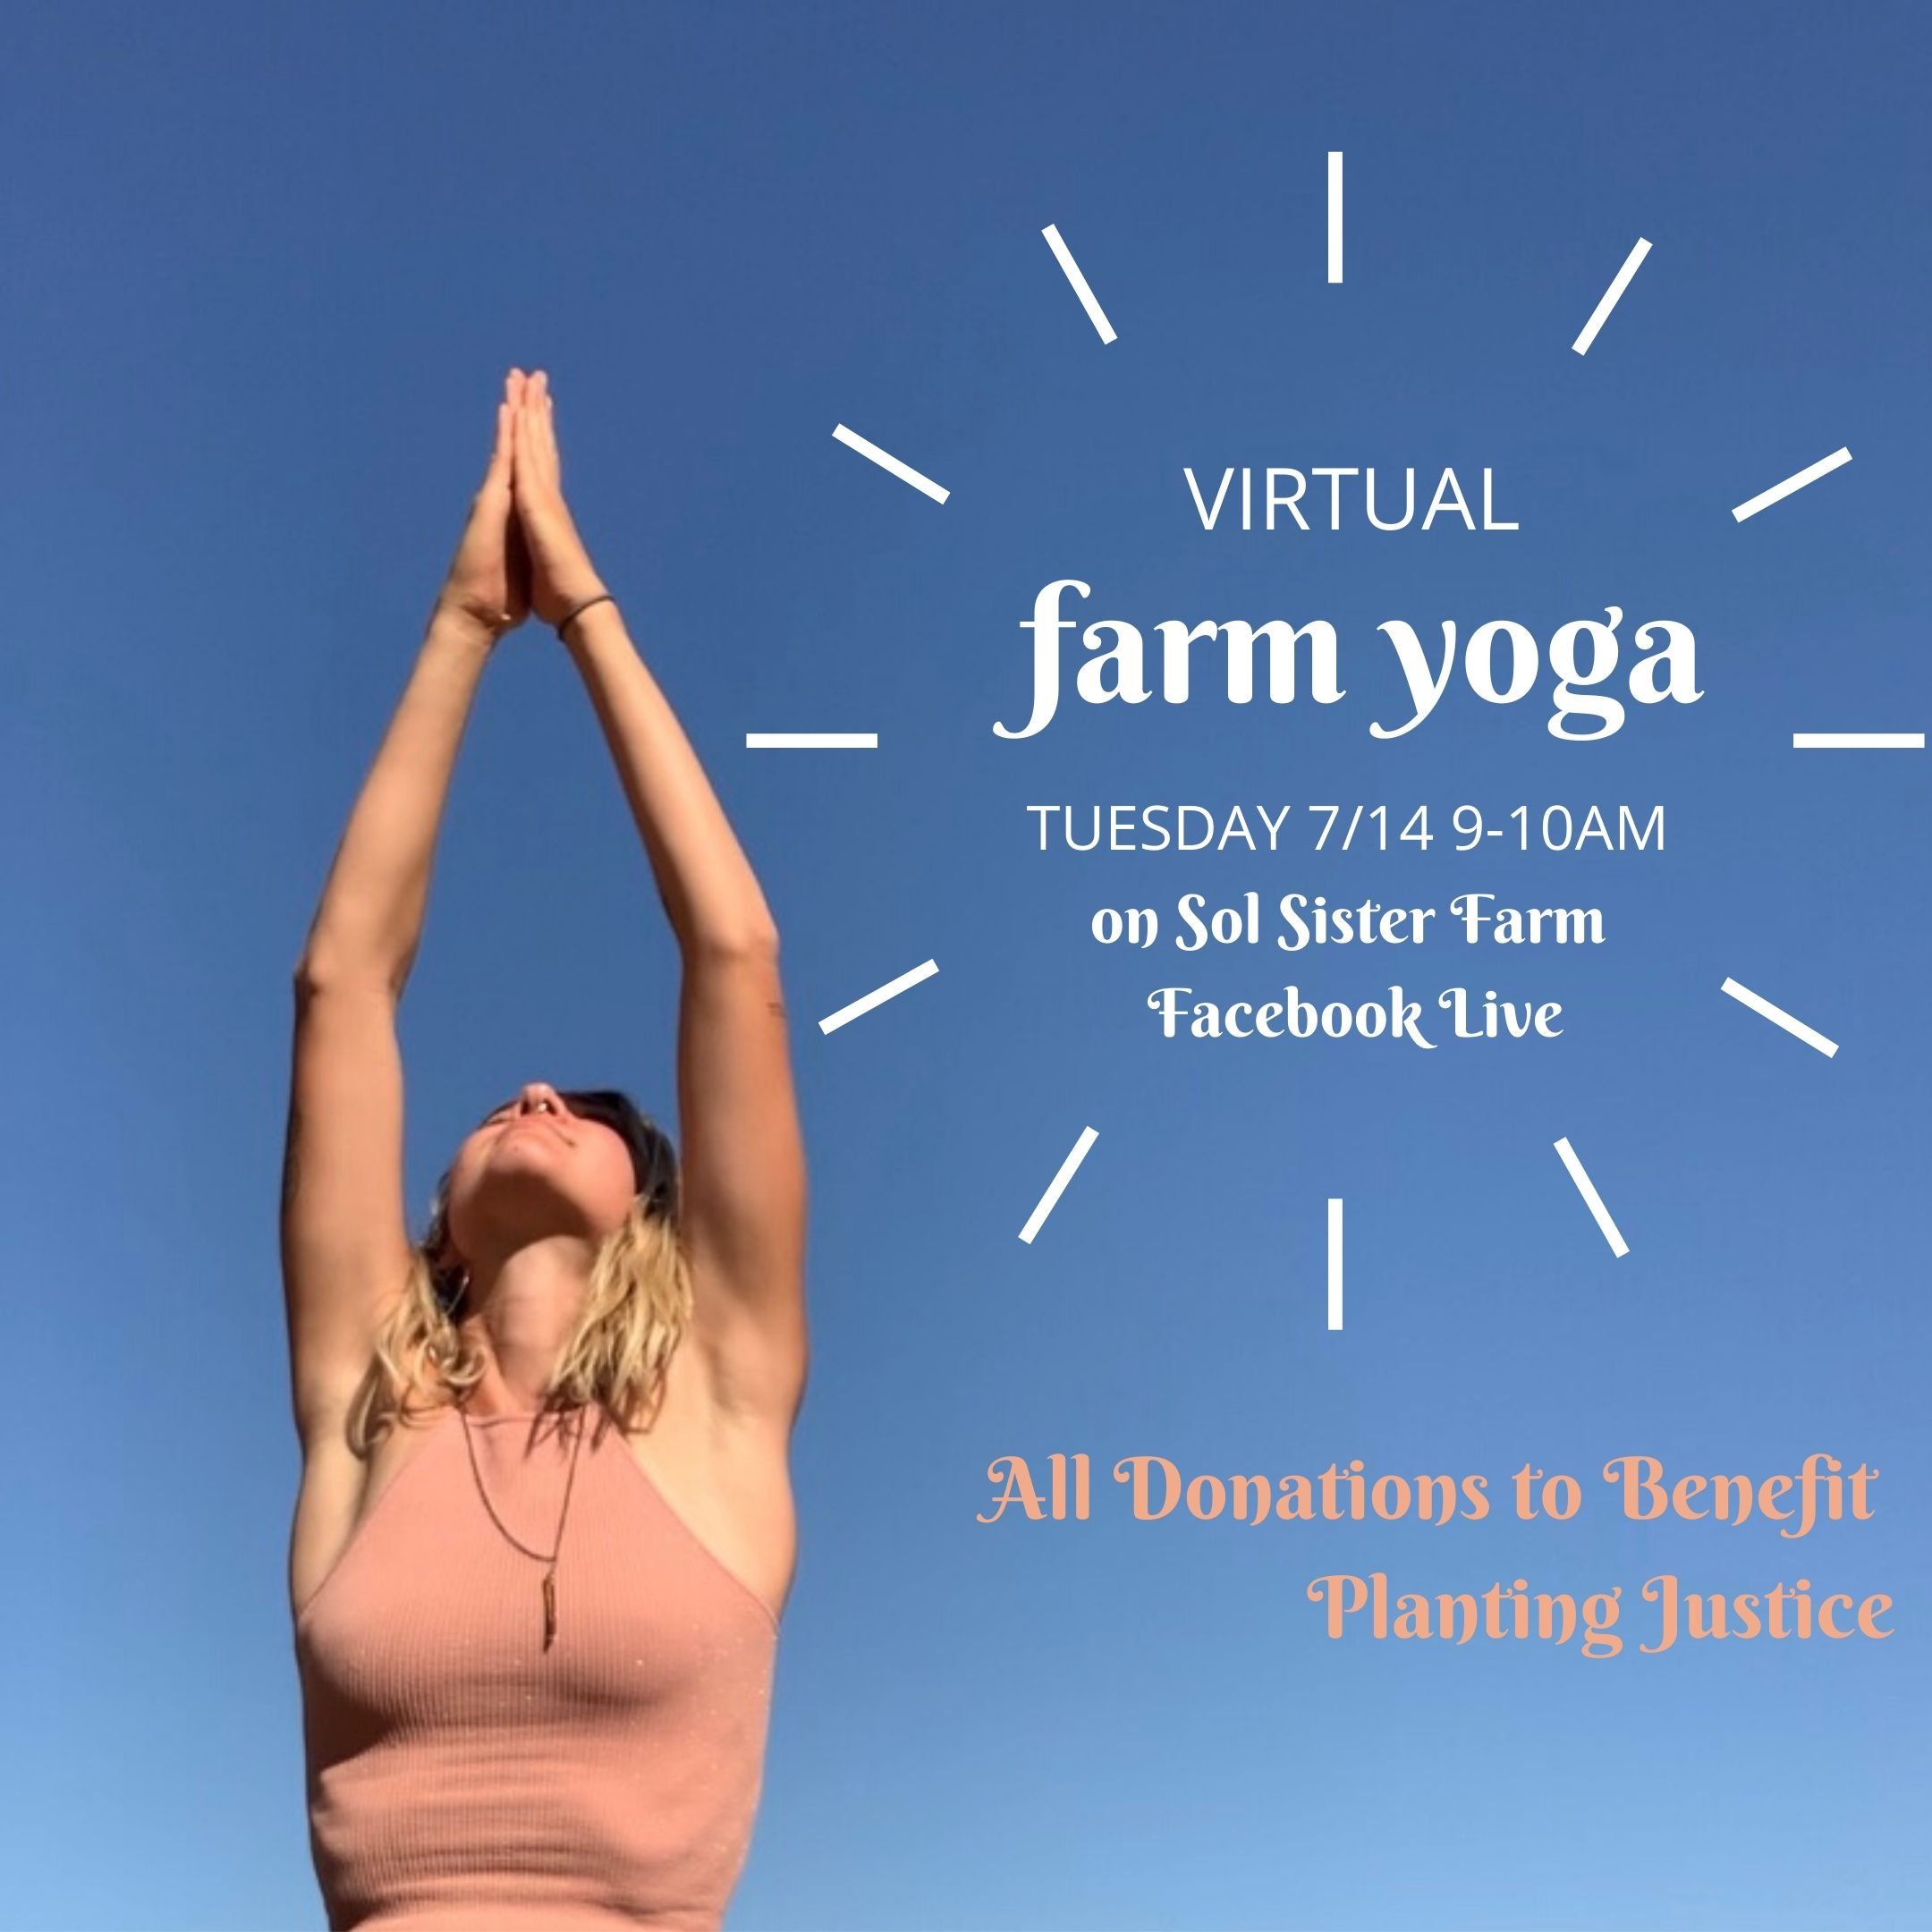 Previous Happening: Farm Happening: Donate to Planting Justice and Virtual Farm Yoga